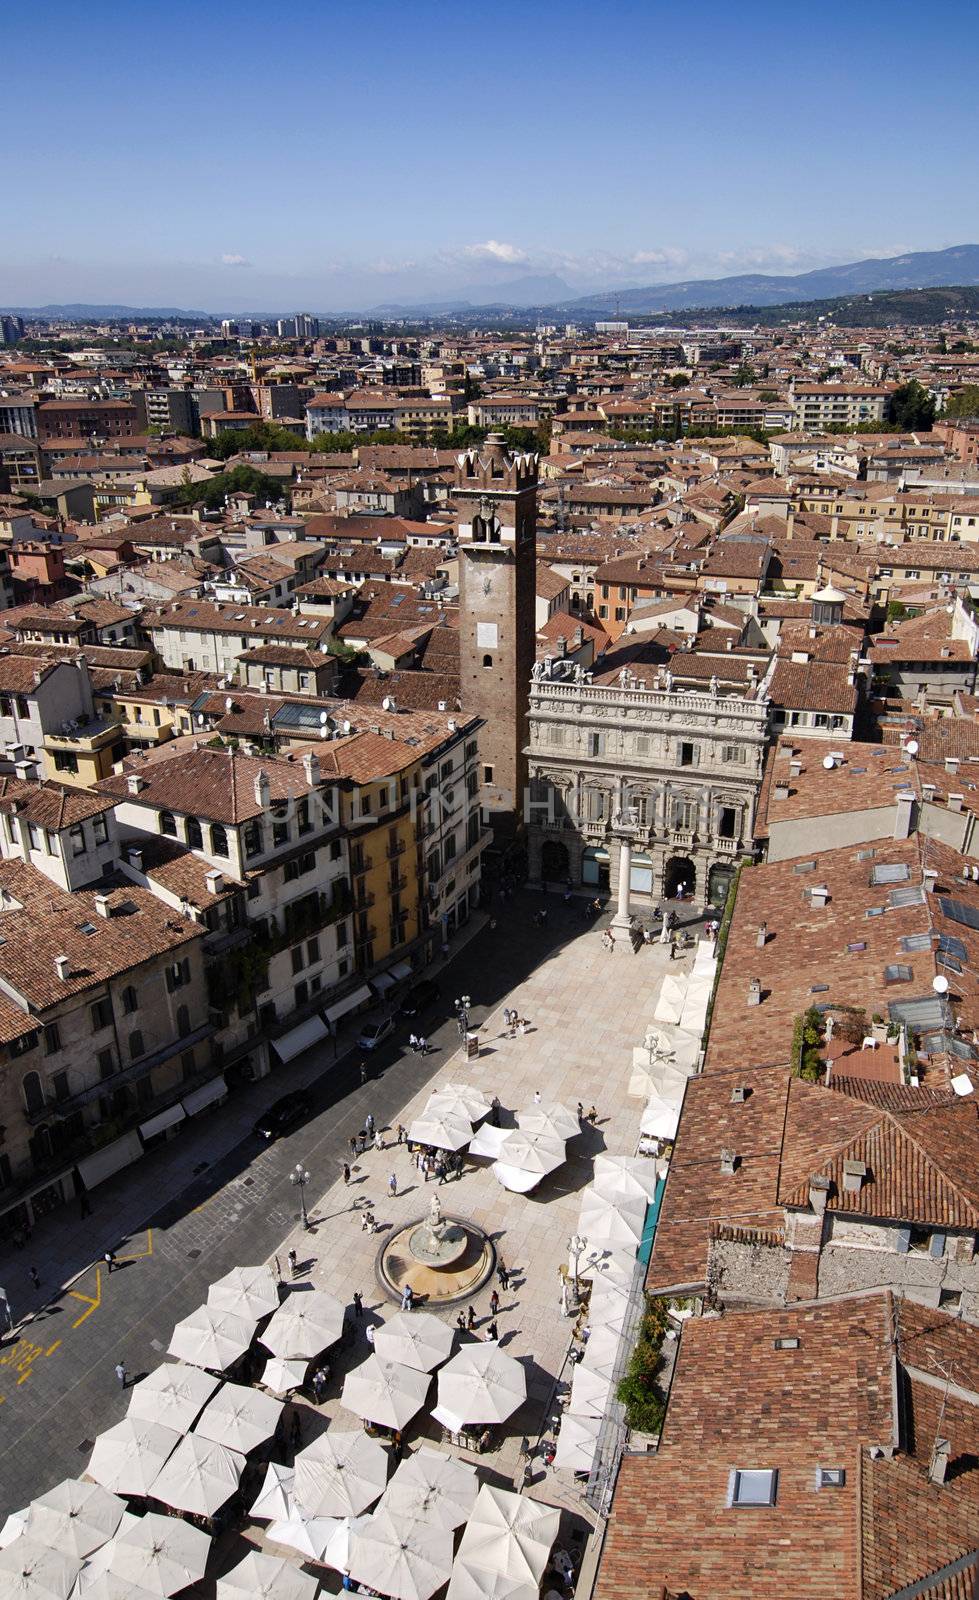 Famous Piazza delle Erbe in Verona, Italy from above